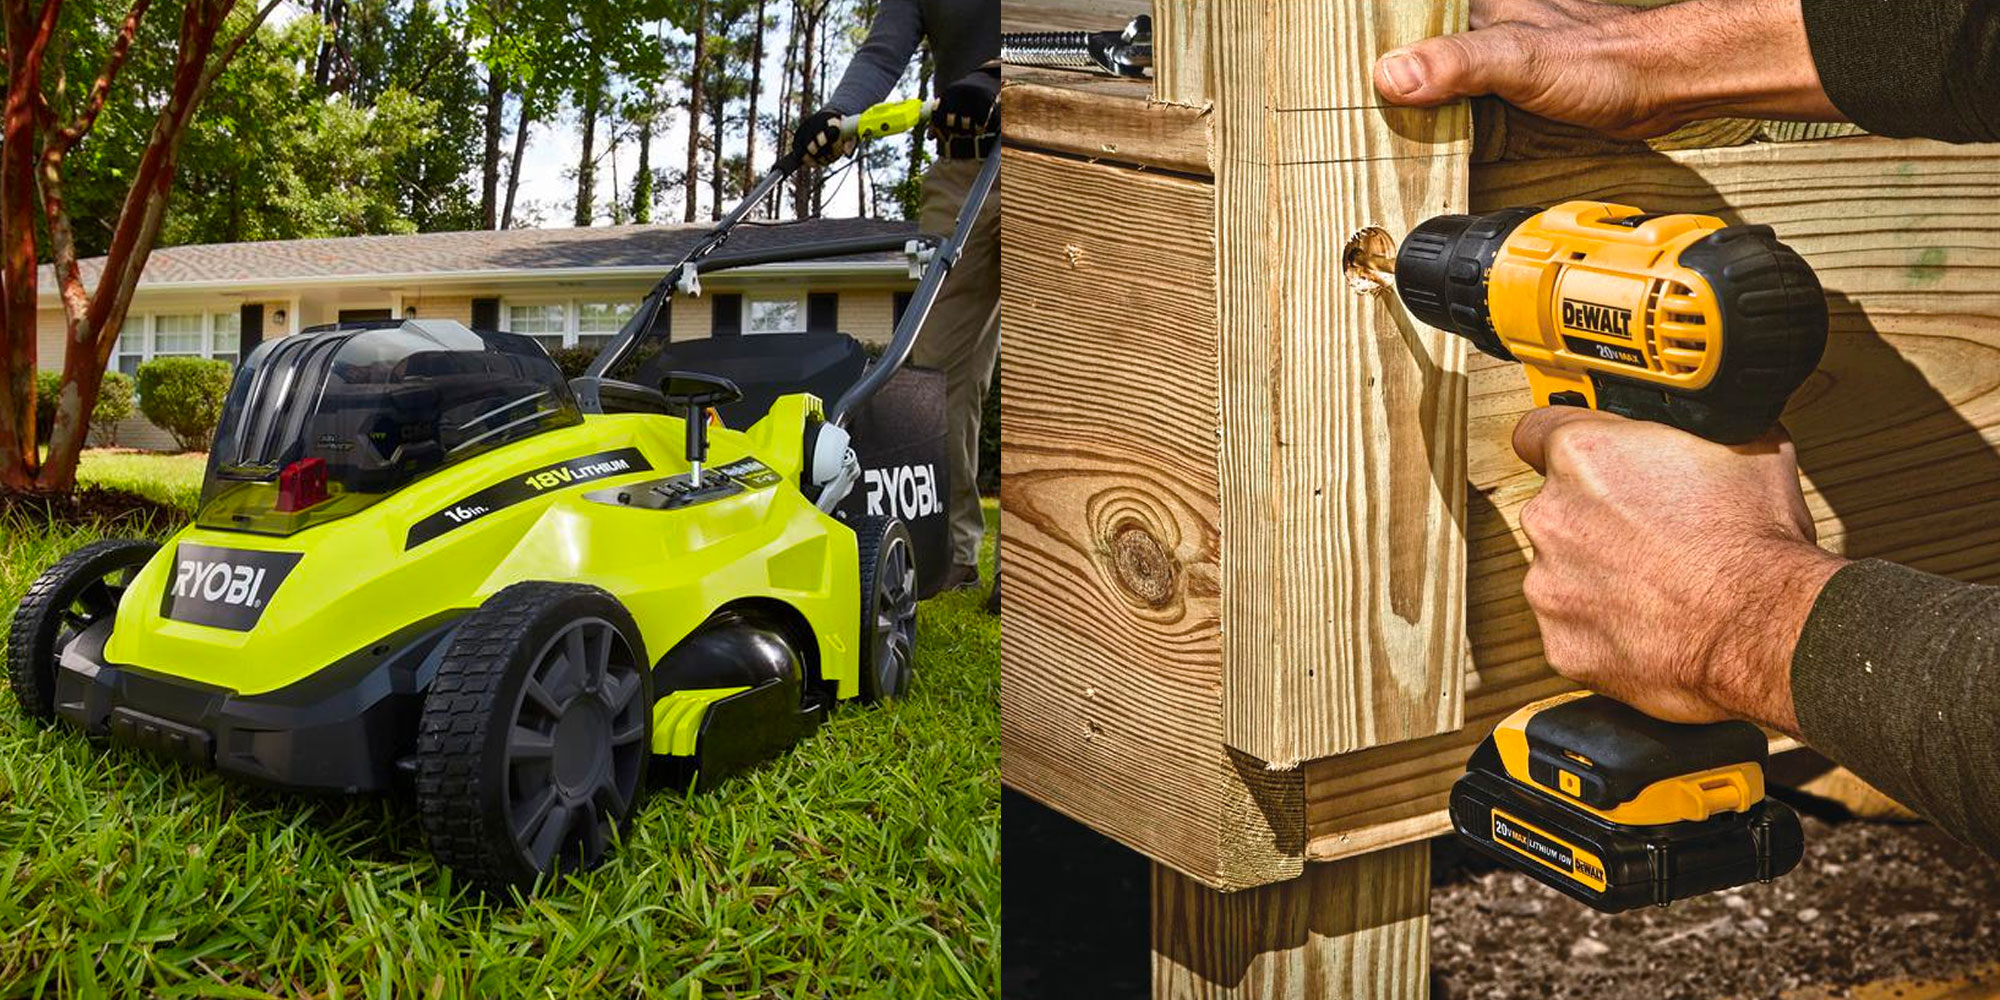 Home Depot's Sneak Peek Labor Day sale is packed with deals 9to5Toys